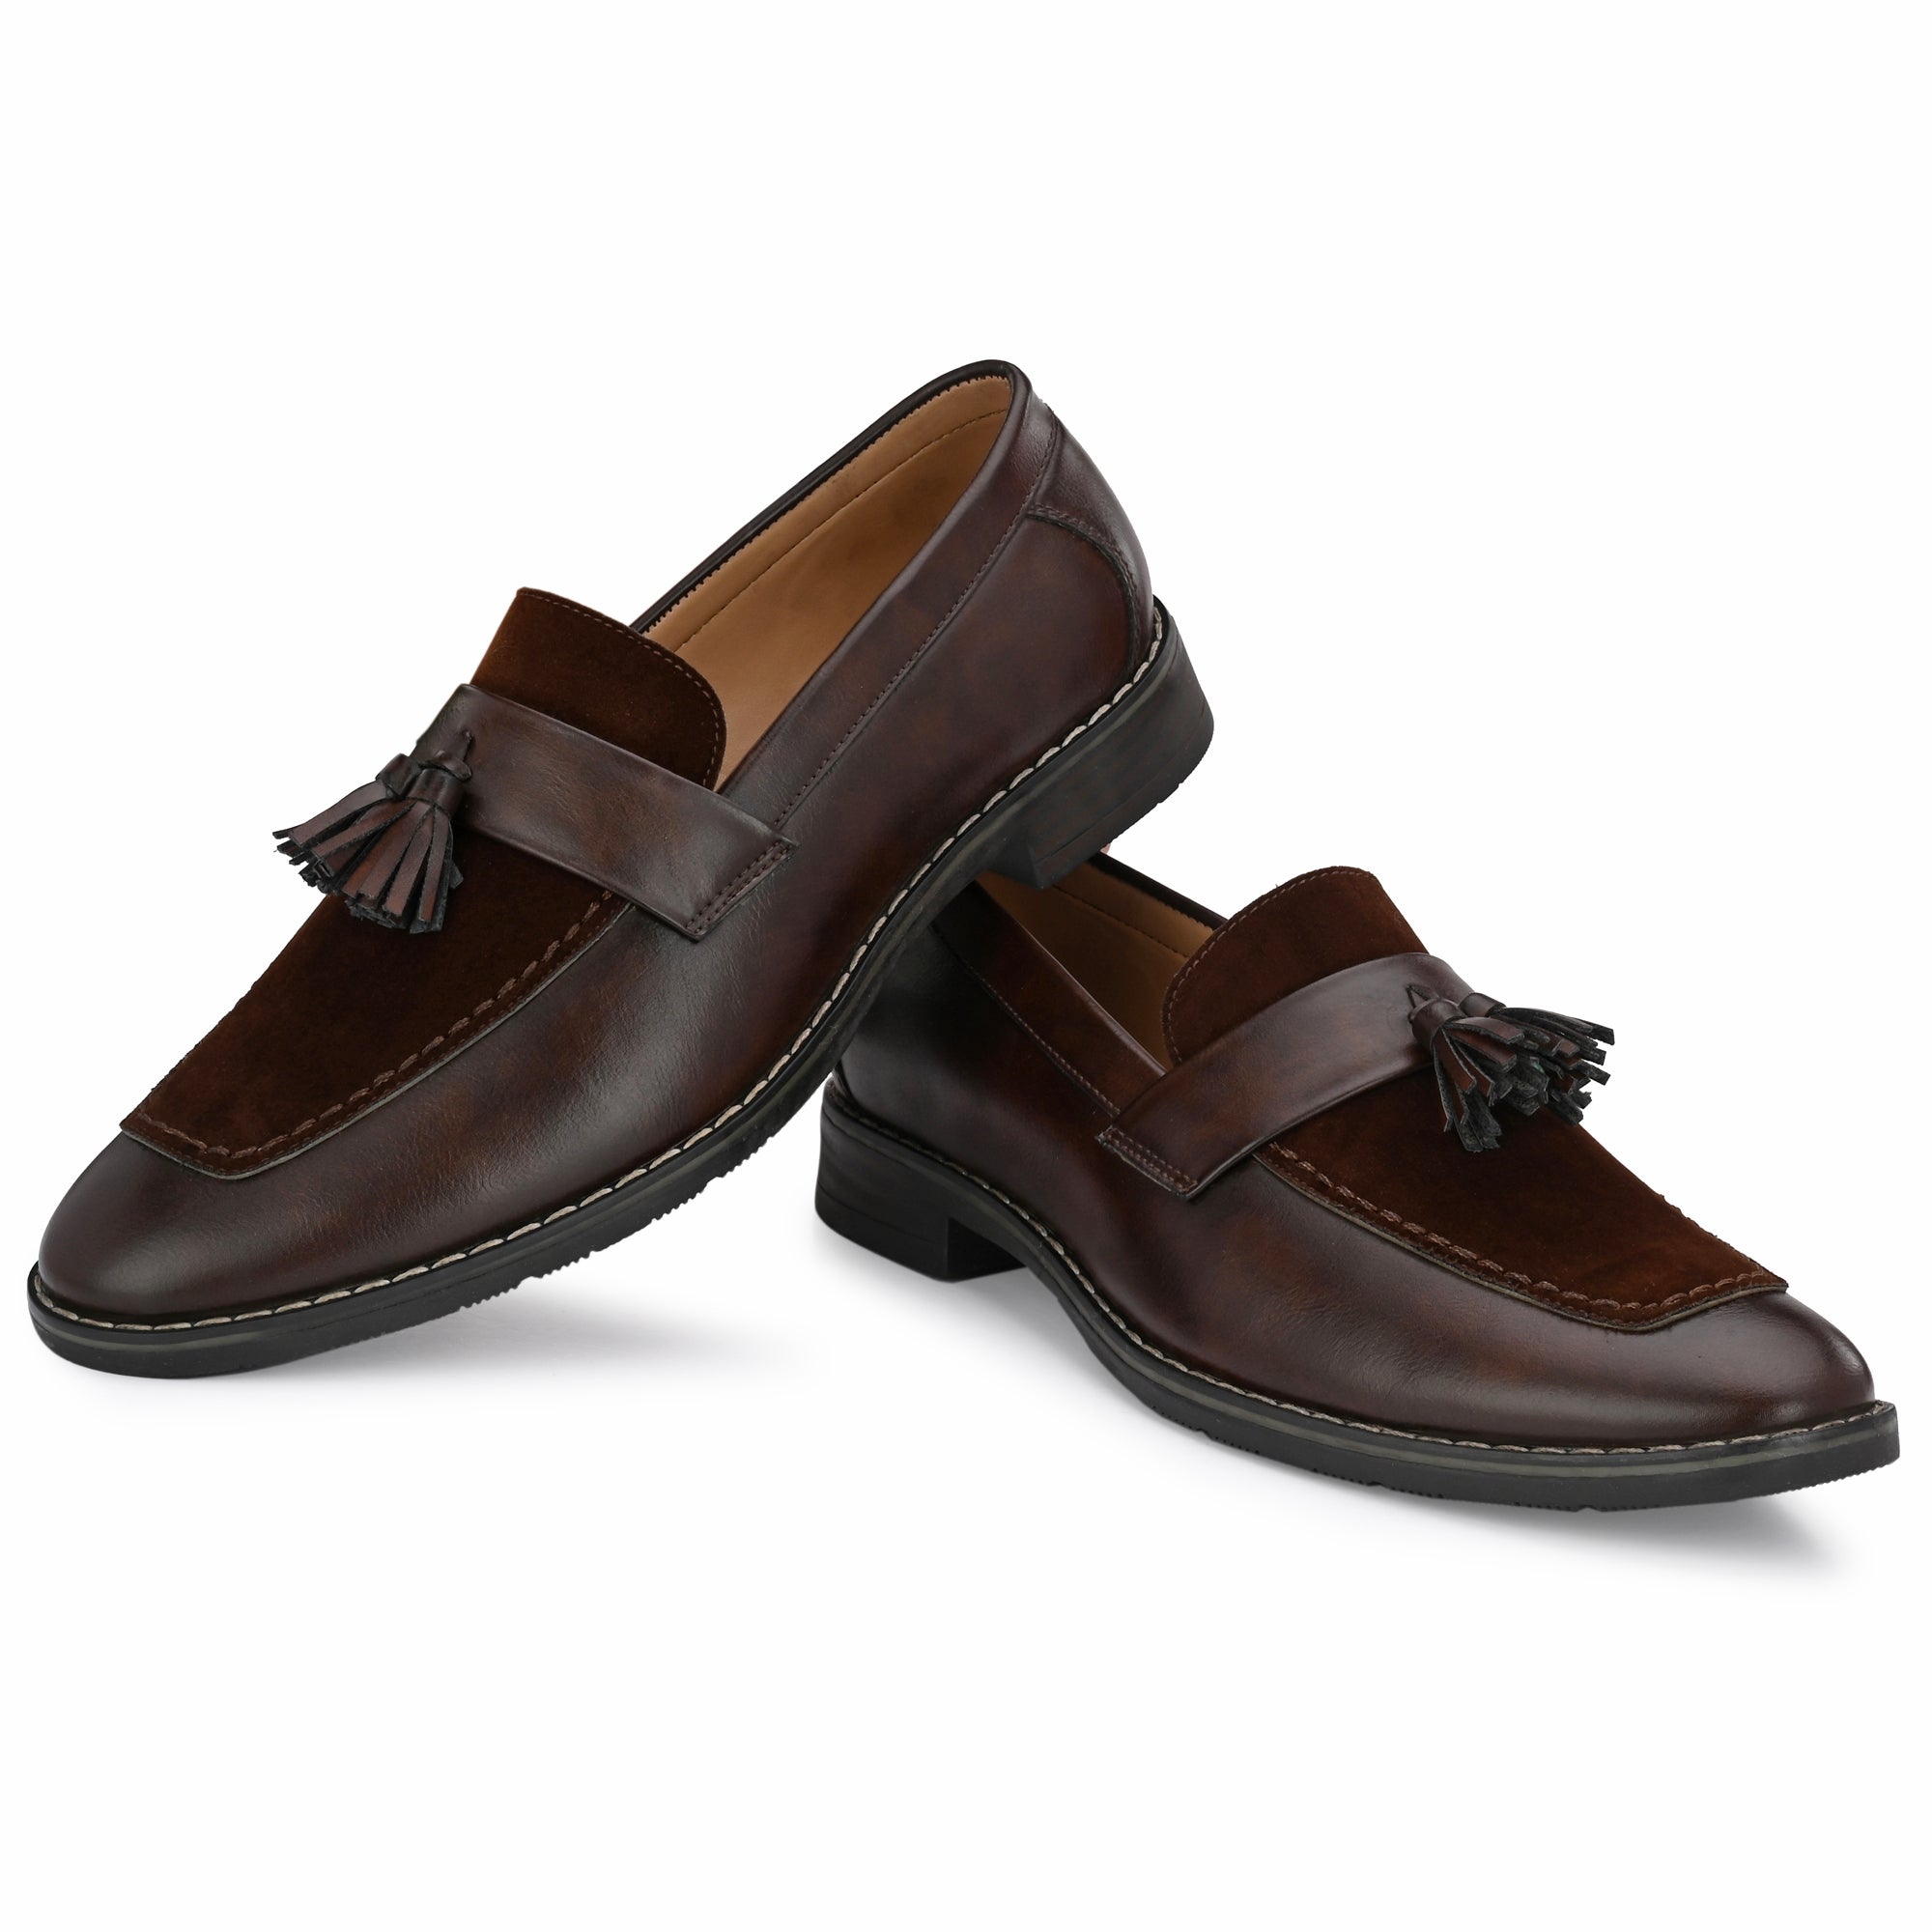 brown-loafers-attitudist-shoes-for-men-with-tassel-sp1b